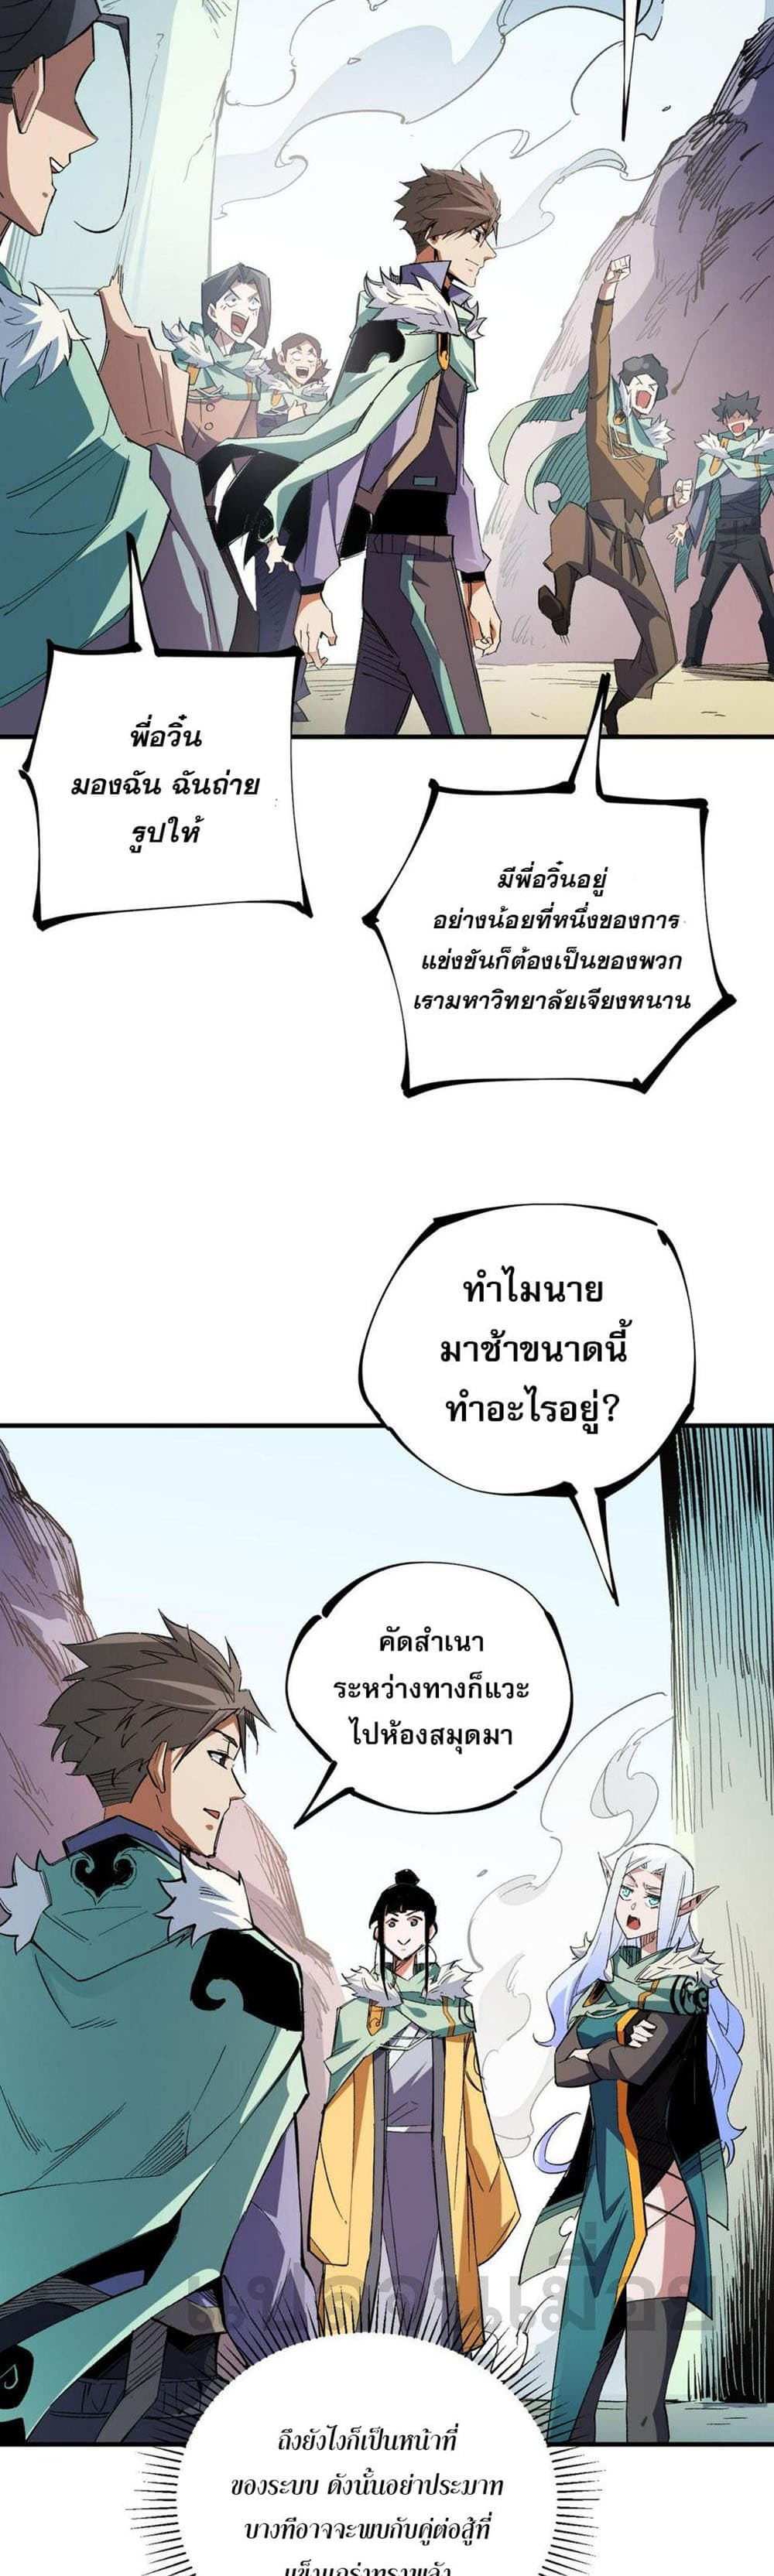 Job Changing for the Entire Population: The Jobless Me Will Terminate the Gods ฉันคือผู้เล่นไร้อาชีพที่สังหารเหล่าเทพ 27-27